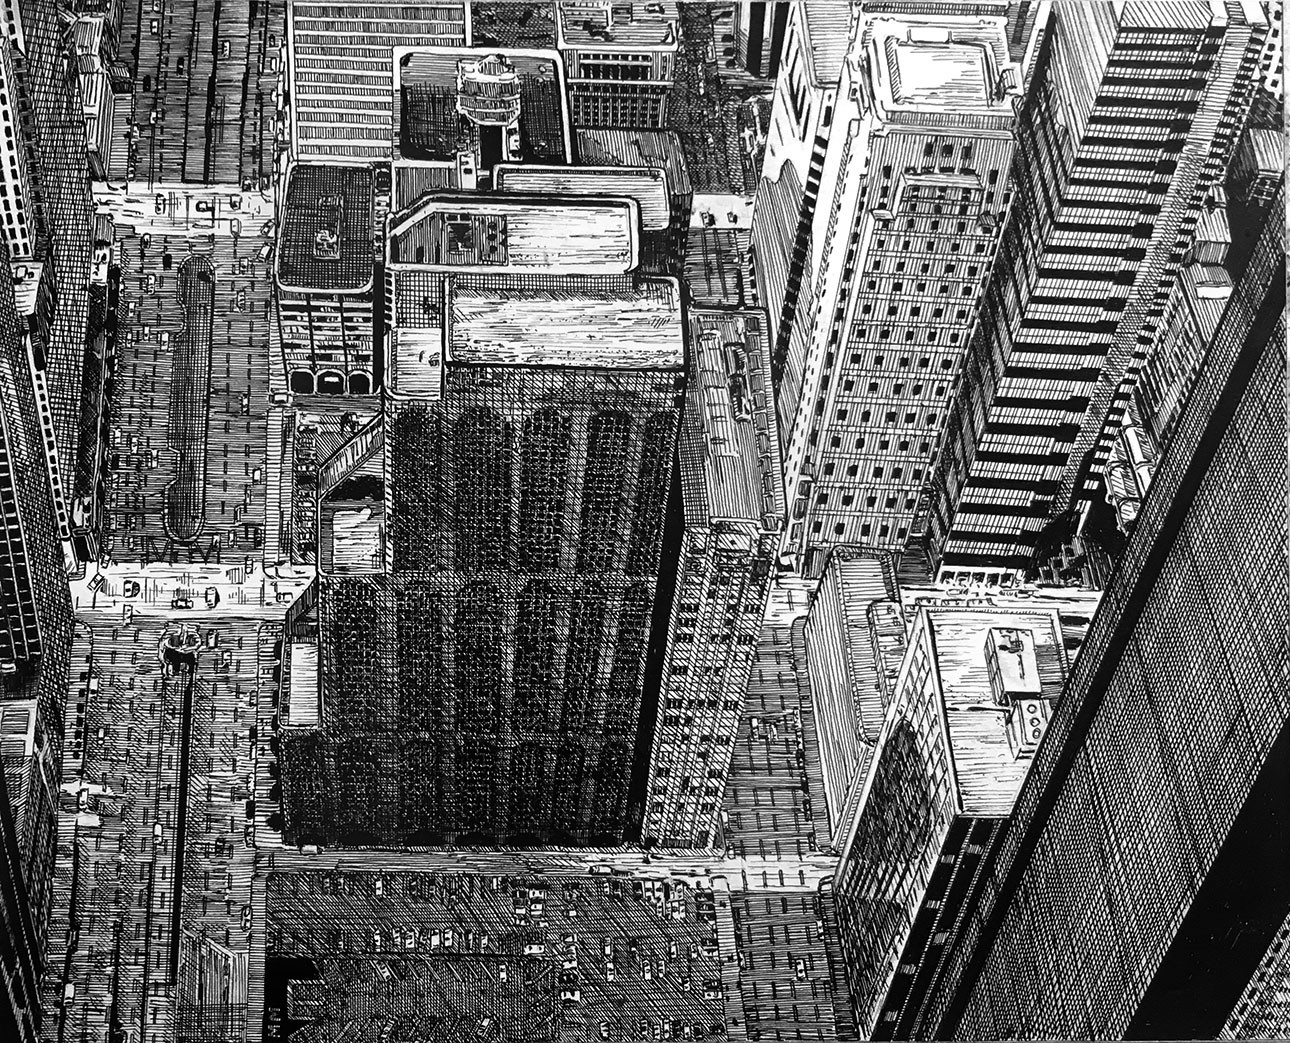 8" x 10" pen and ink drawn from a photo I took on the Sears Tower (now Willis Tower) skydeck in Chicago.